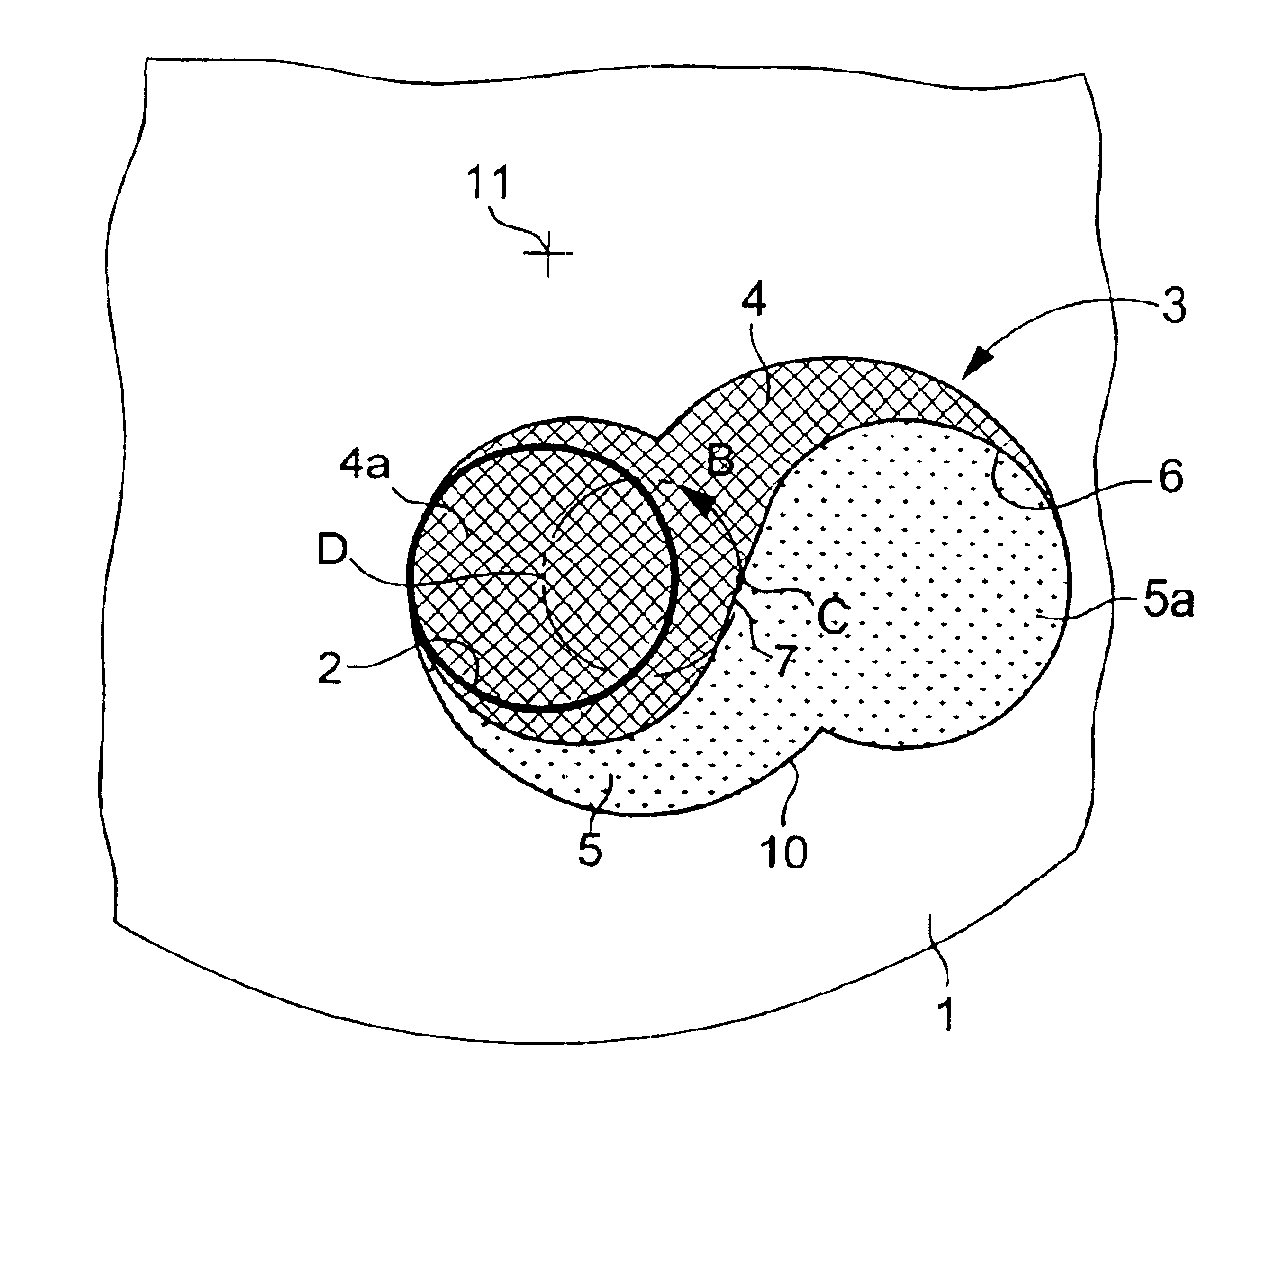 Moon phase display device, particularly for a timepiece